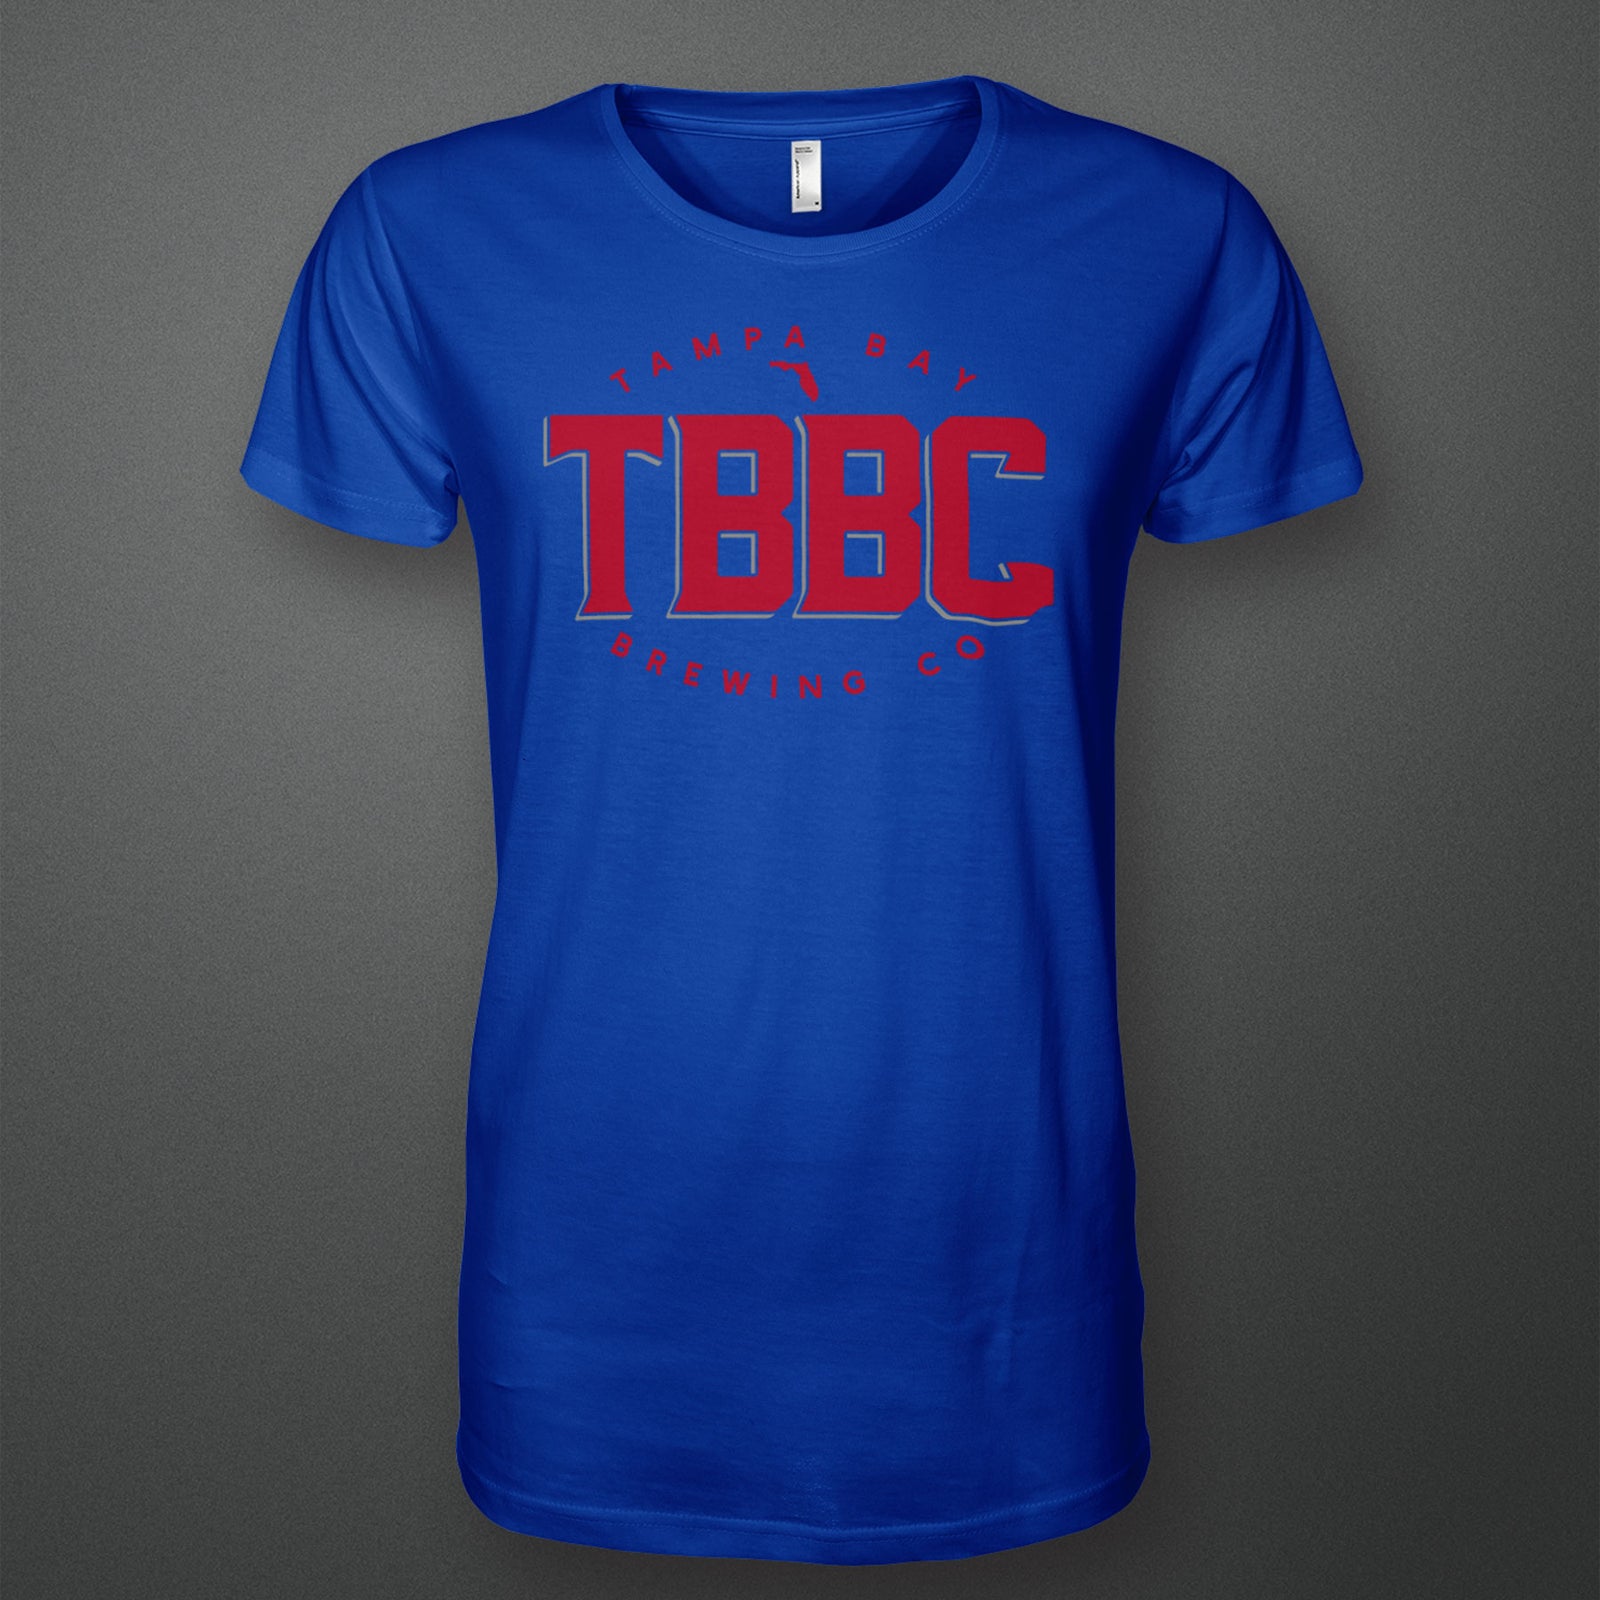 -CLEARANCE- TBBC Logo T-Shirt Blue & Red